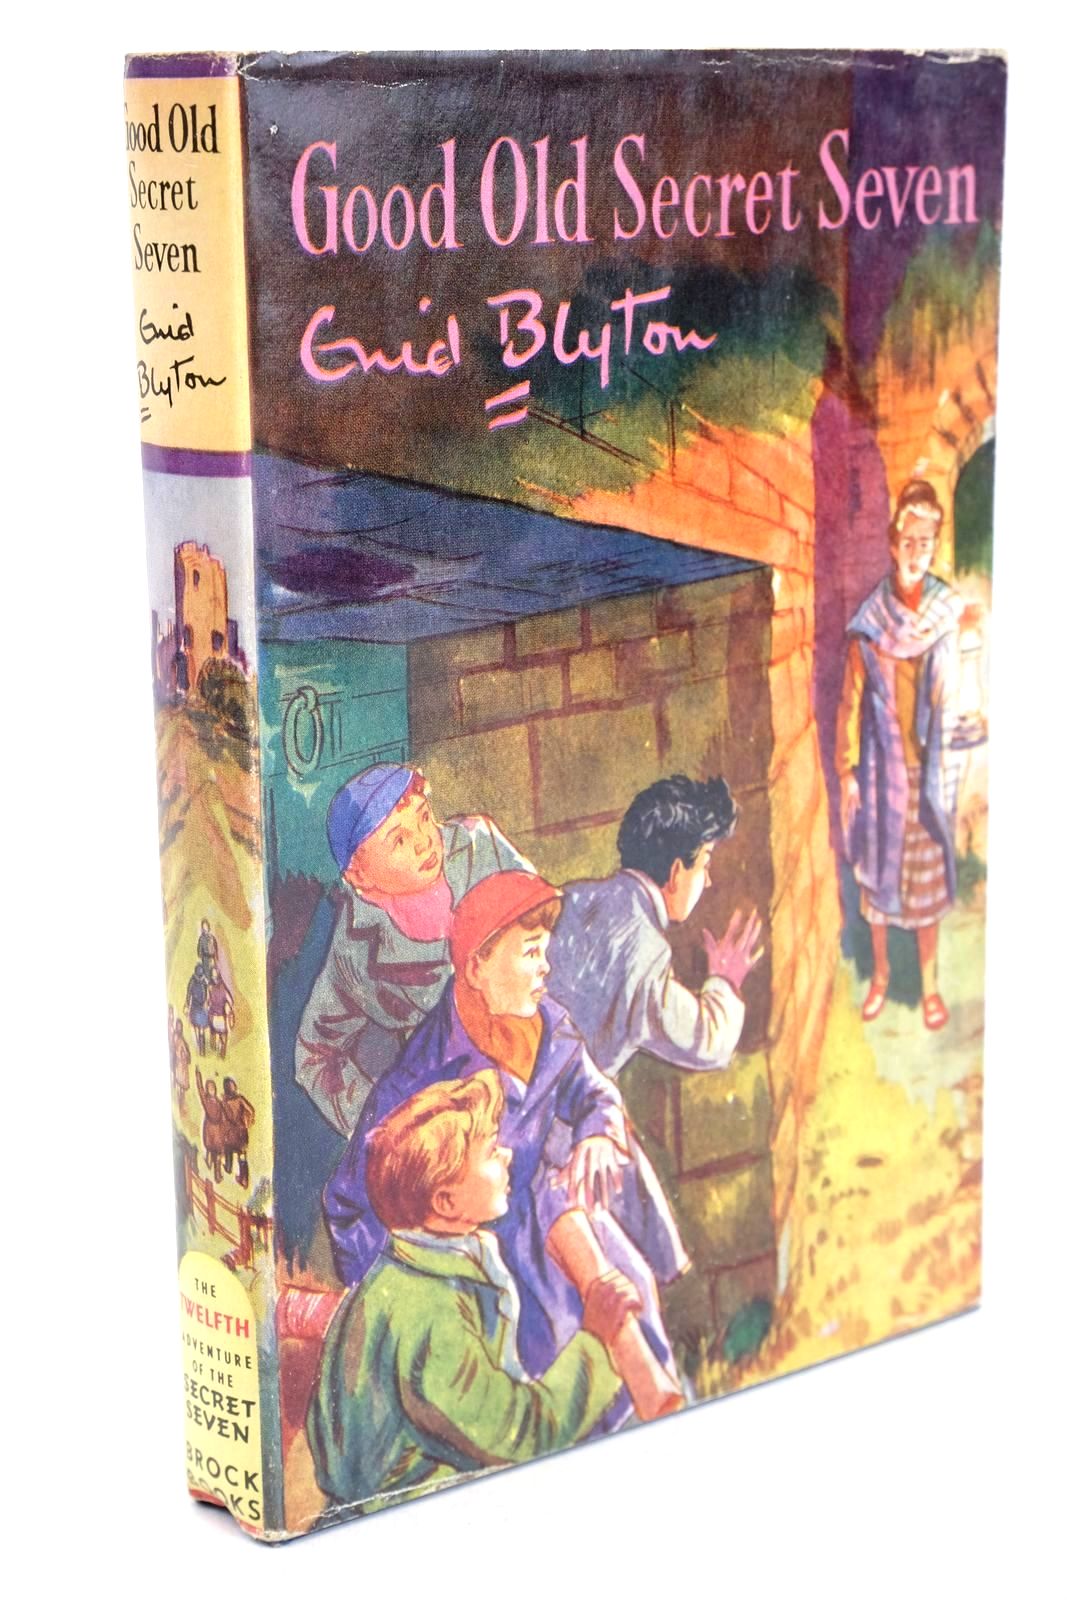 Photo of GOOD OLD SECRET SEVEN written by Blyton, Enid illustrated by Sharrocks, Burgess published by Brockhampton Press (STOCK CODE: 1326868)  for sale by Stella & Rose's Books